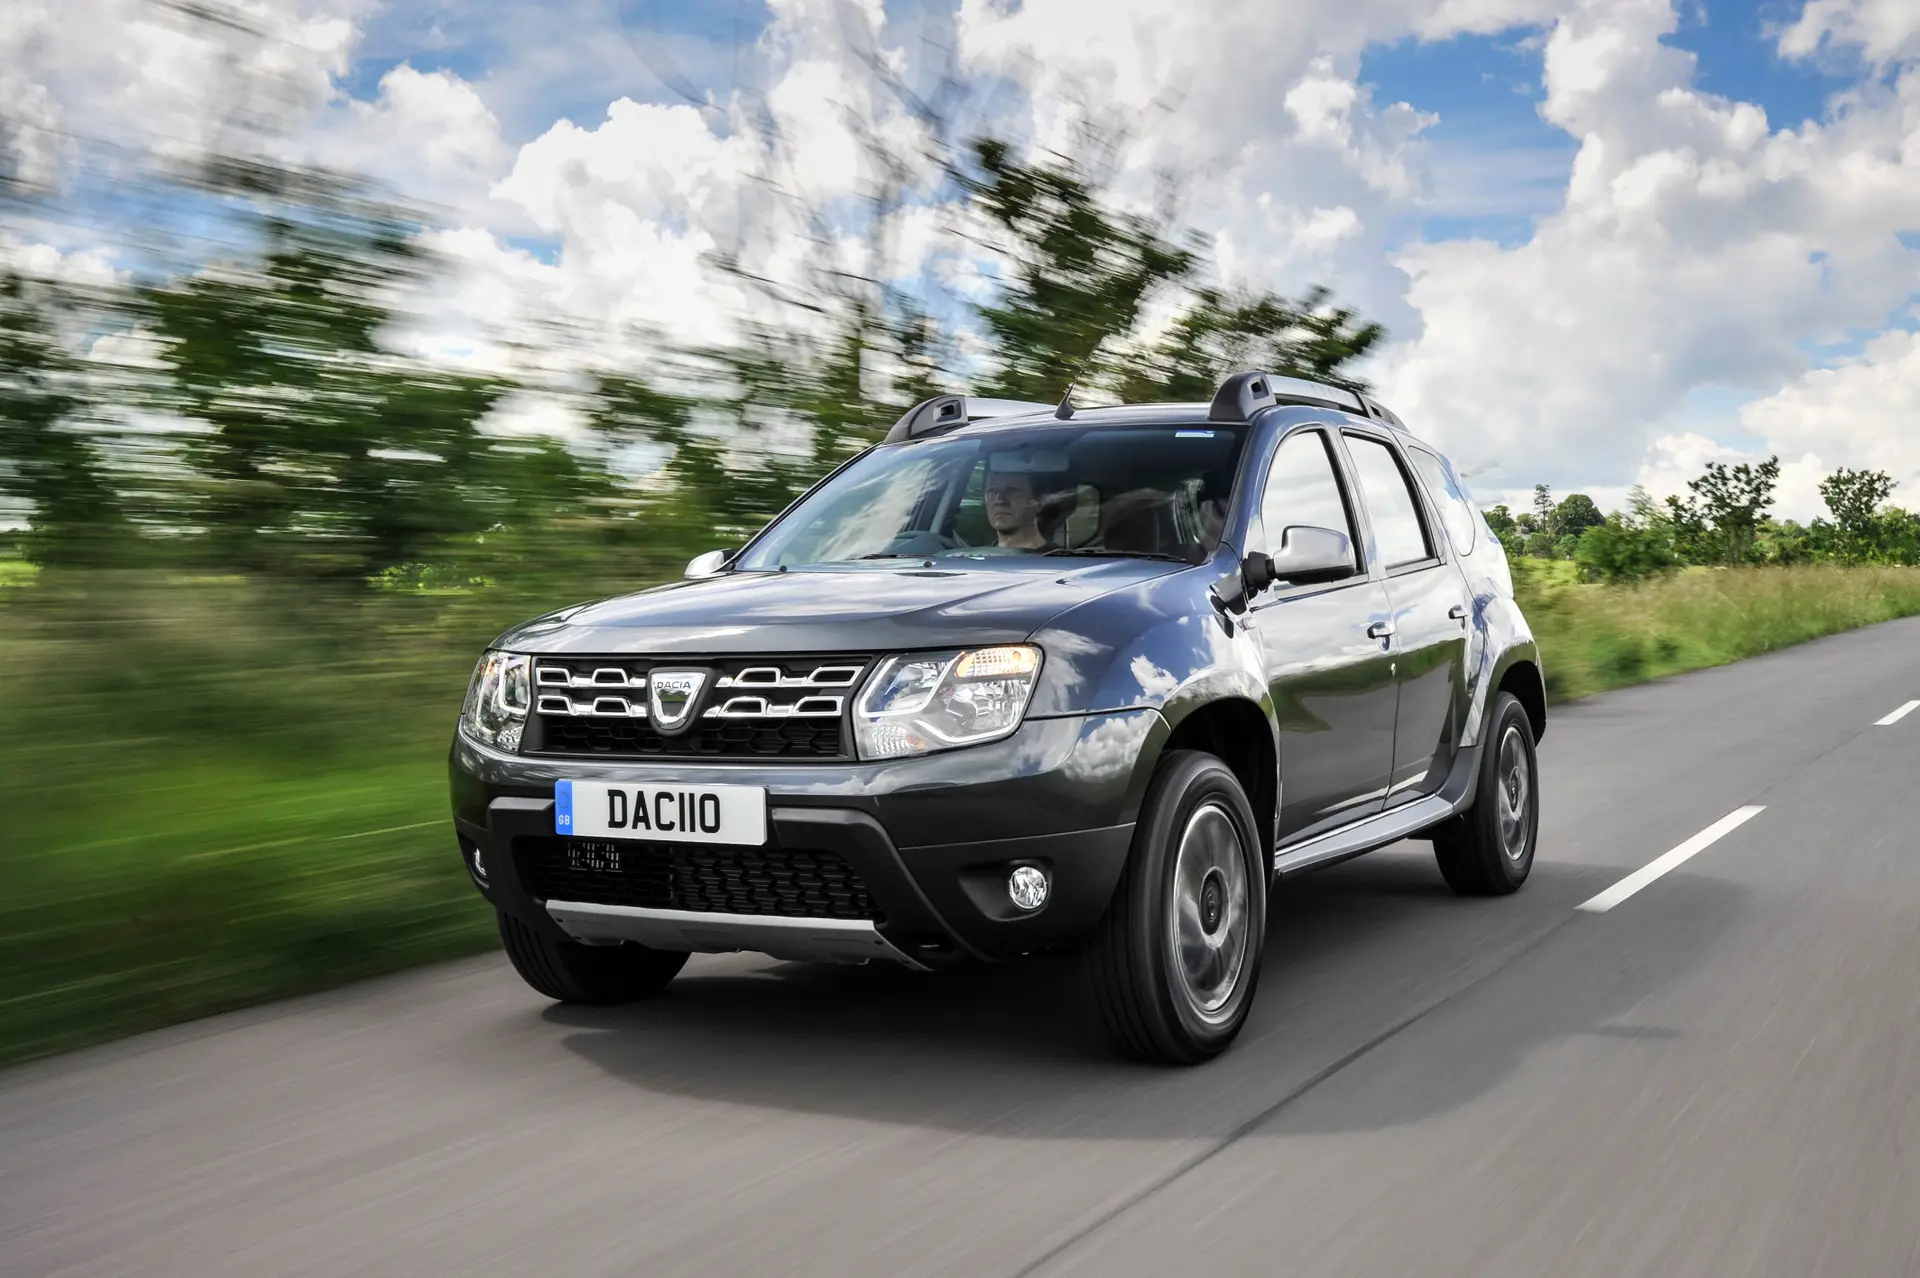 Used Dacia Duster (2012-2018) Review: exterior front three quarter photo of the Dacia Duster on the road 